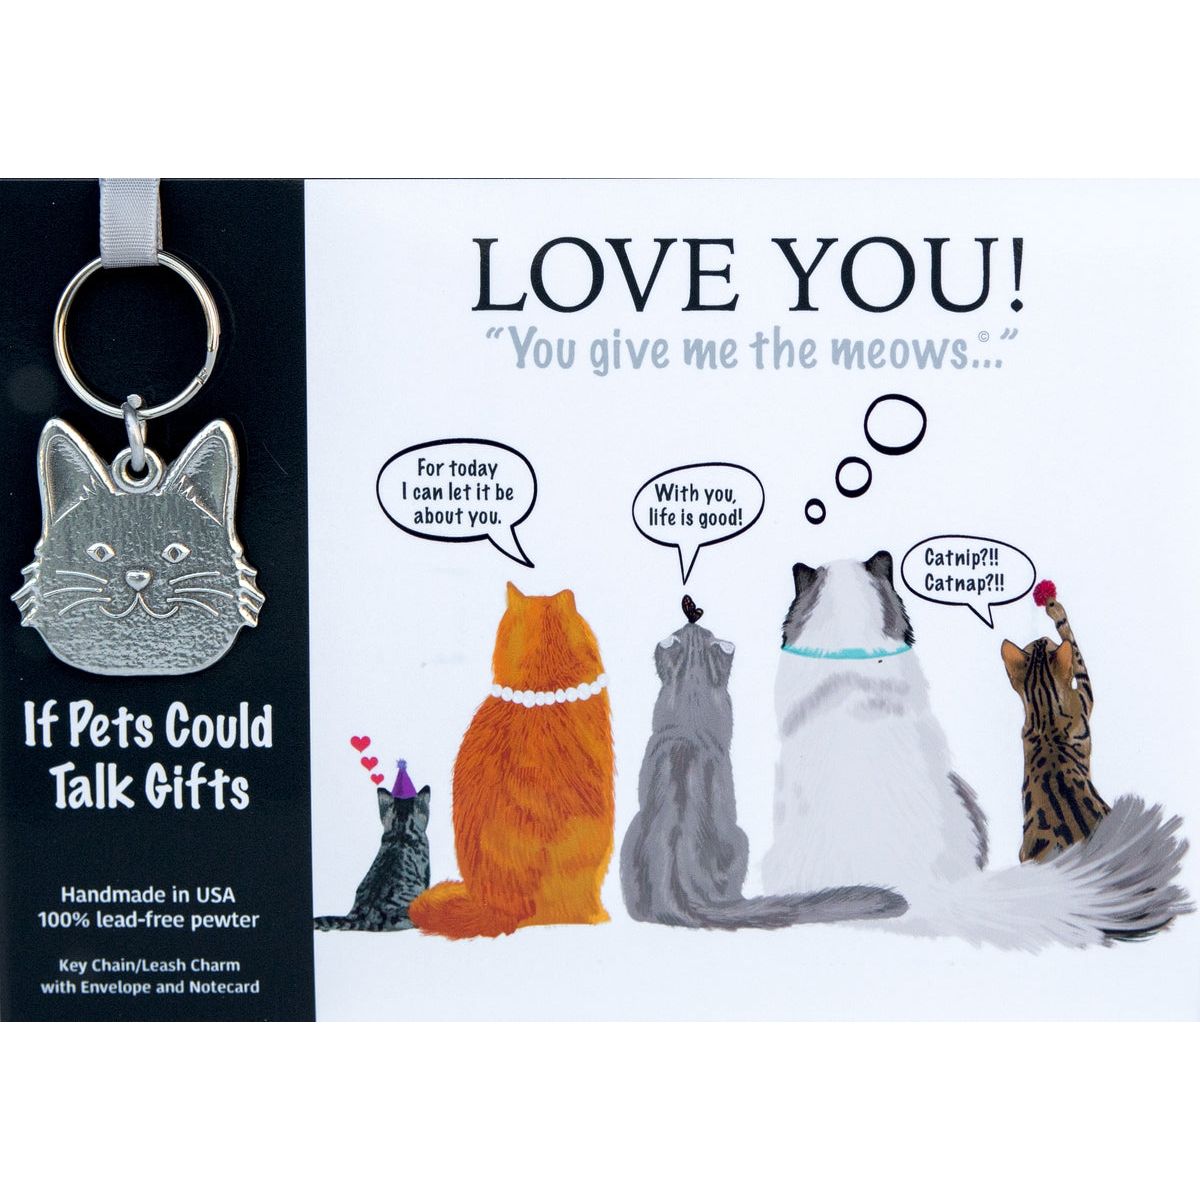 Pewter keychain in shape of a cat's face packaged with a "Love You" card.